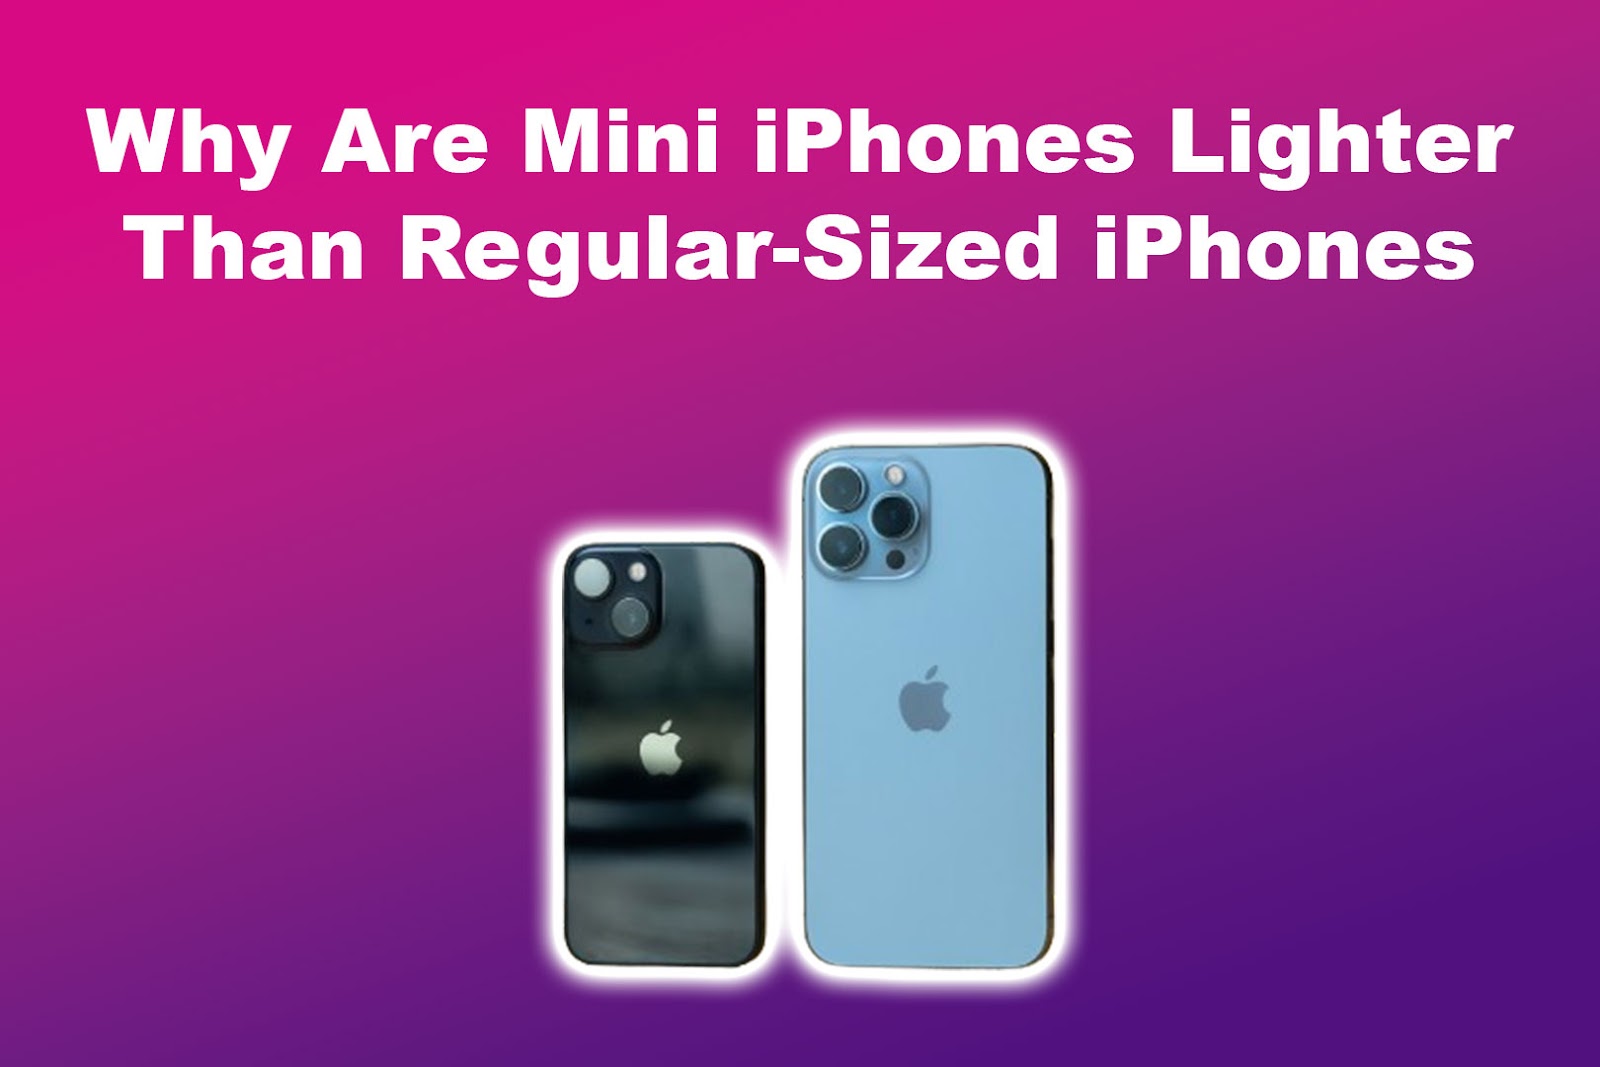 Why Are Mini iPhones Lighter Than Regular-Sized iPhones